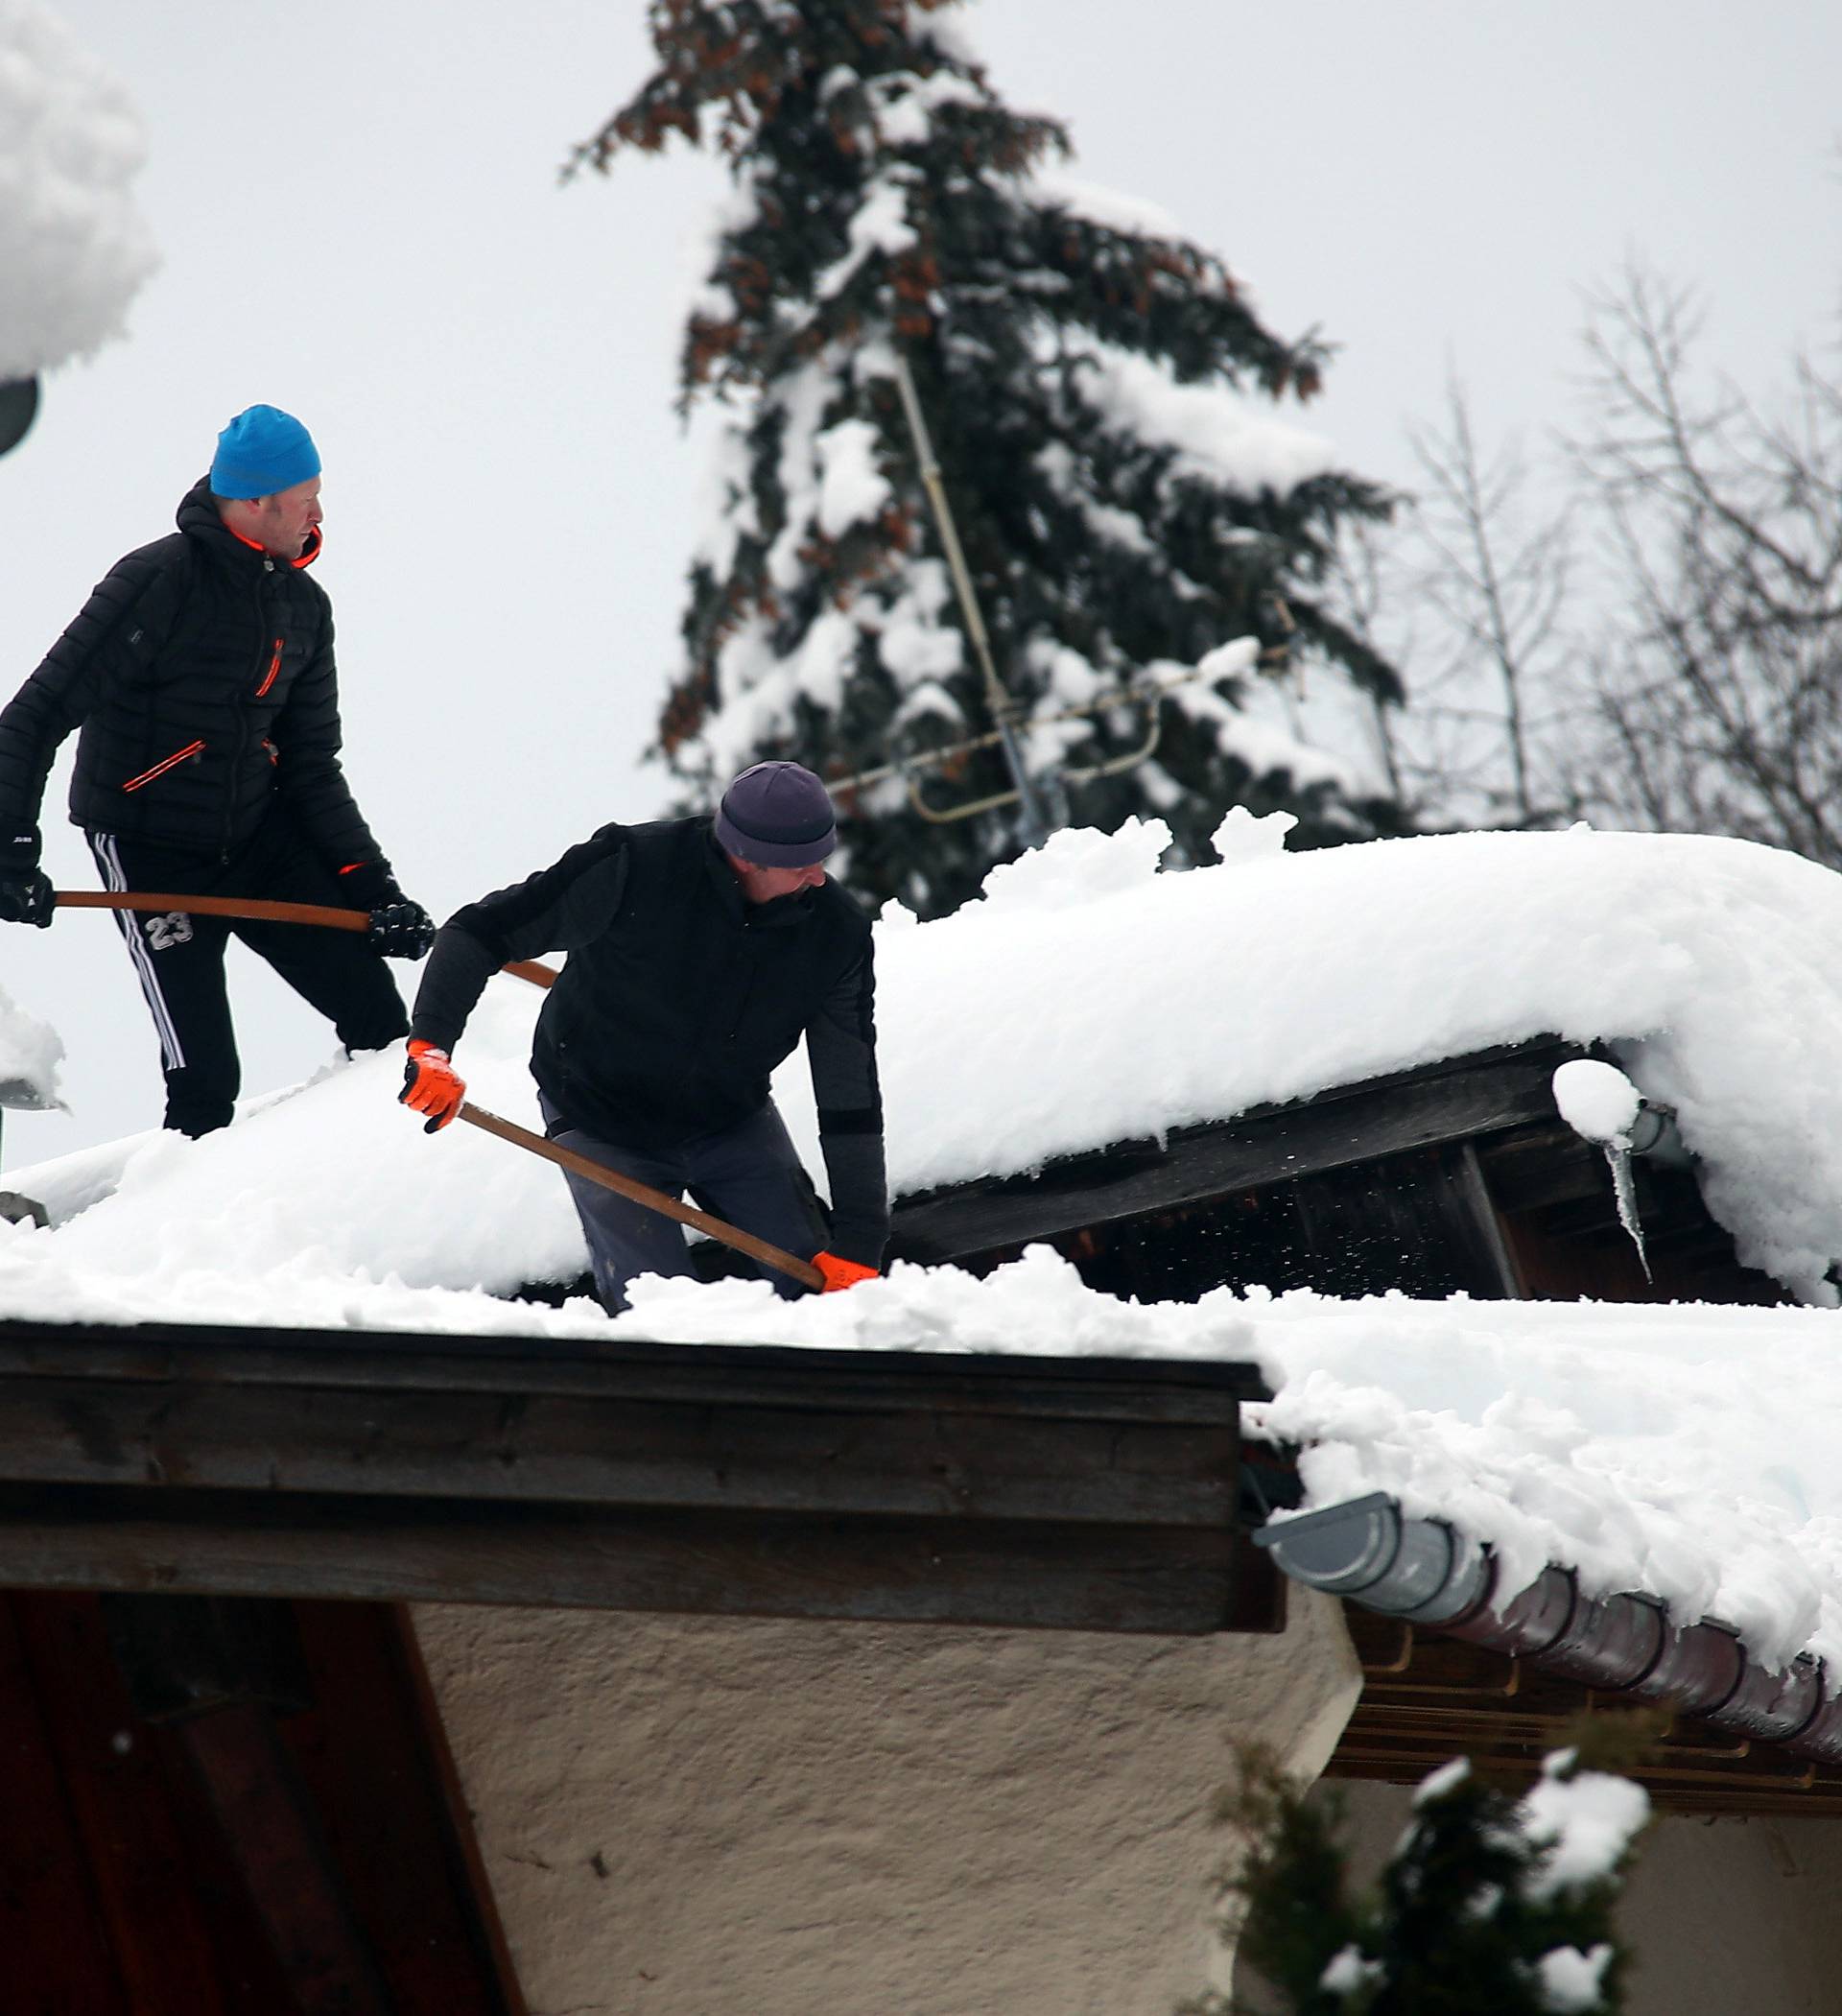 People shovel snow from the roofs of their houses after heavy snowfall in Warngau